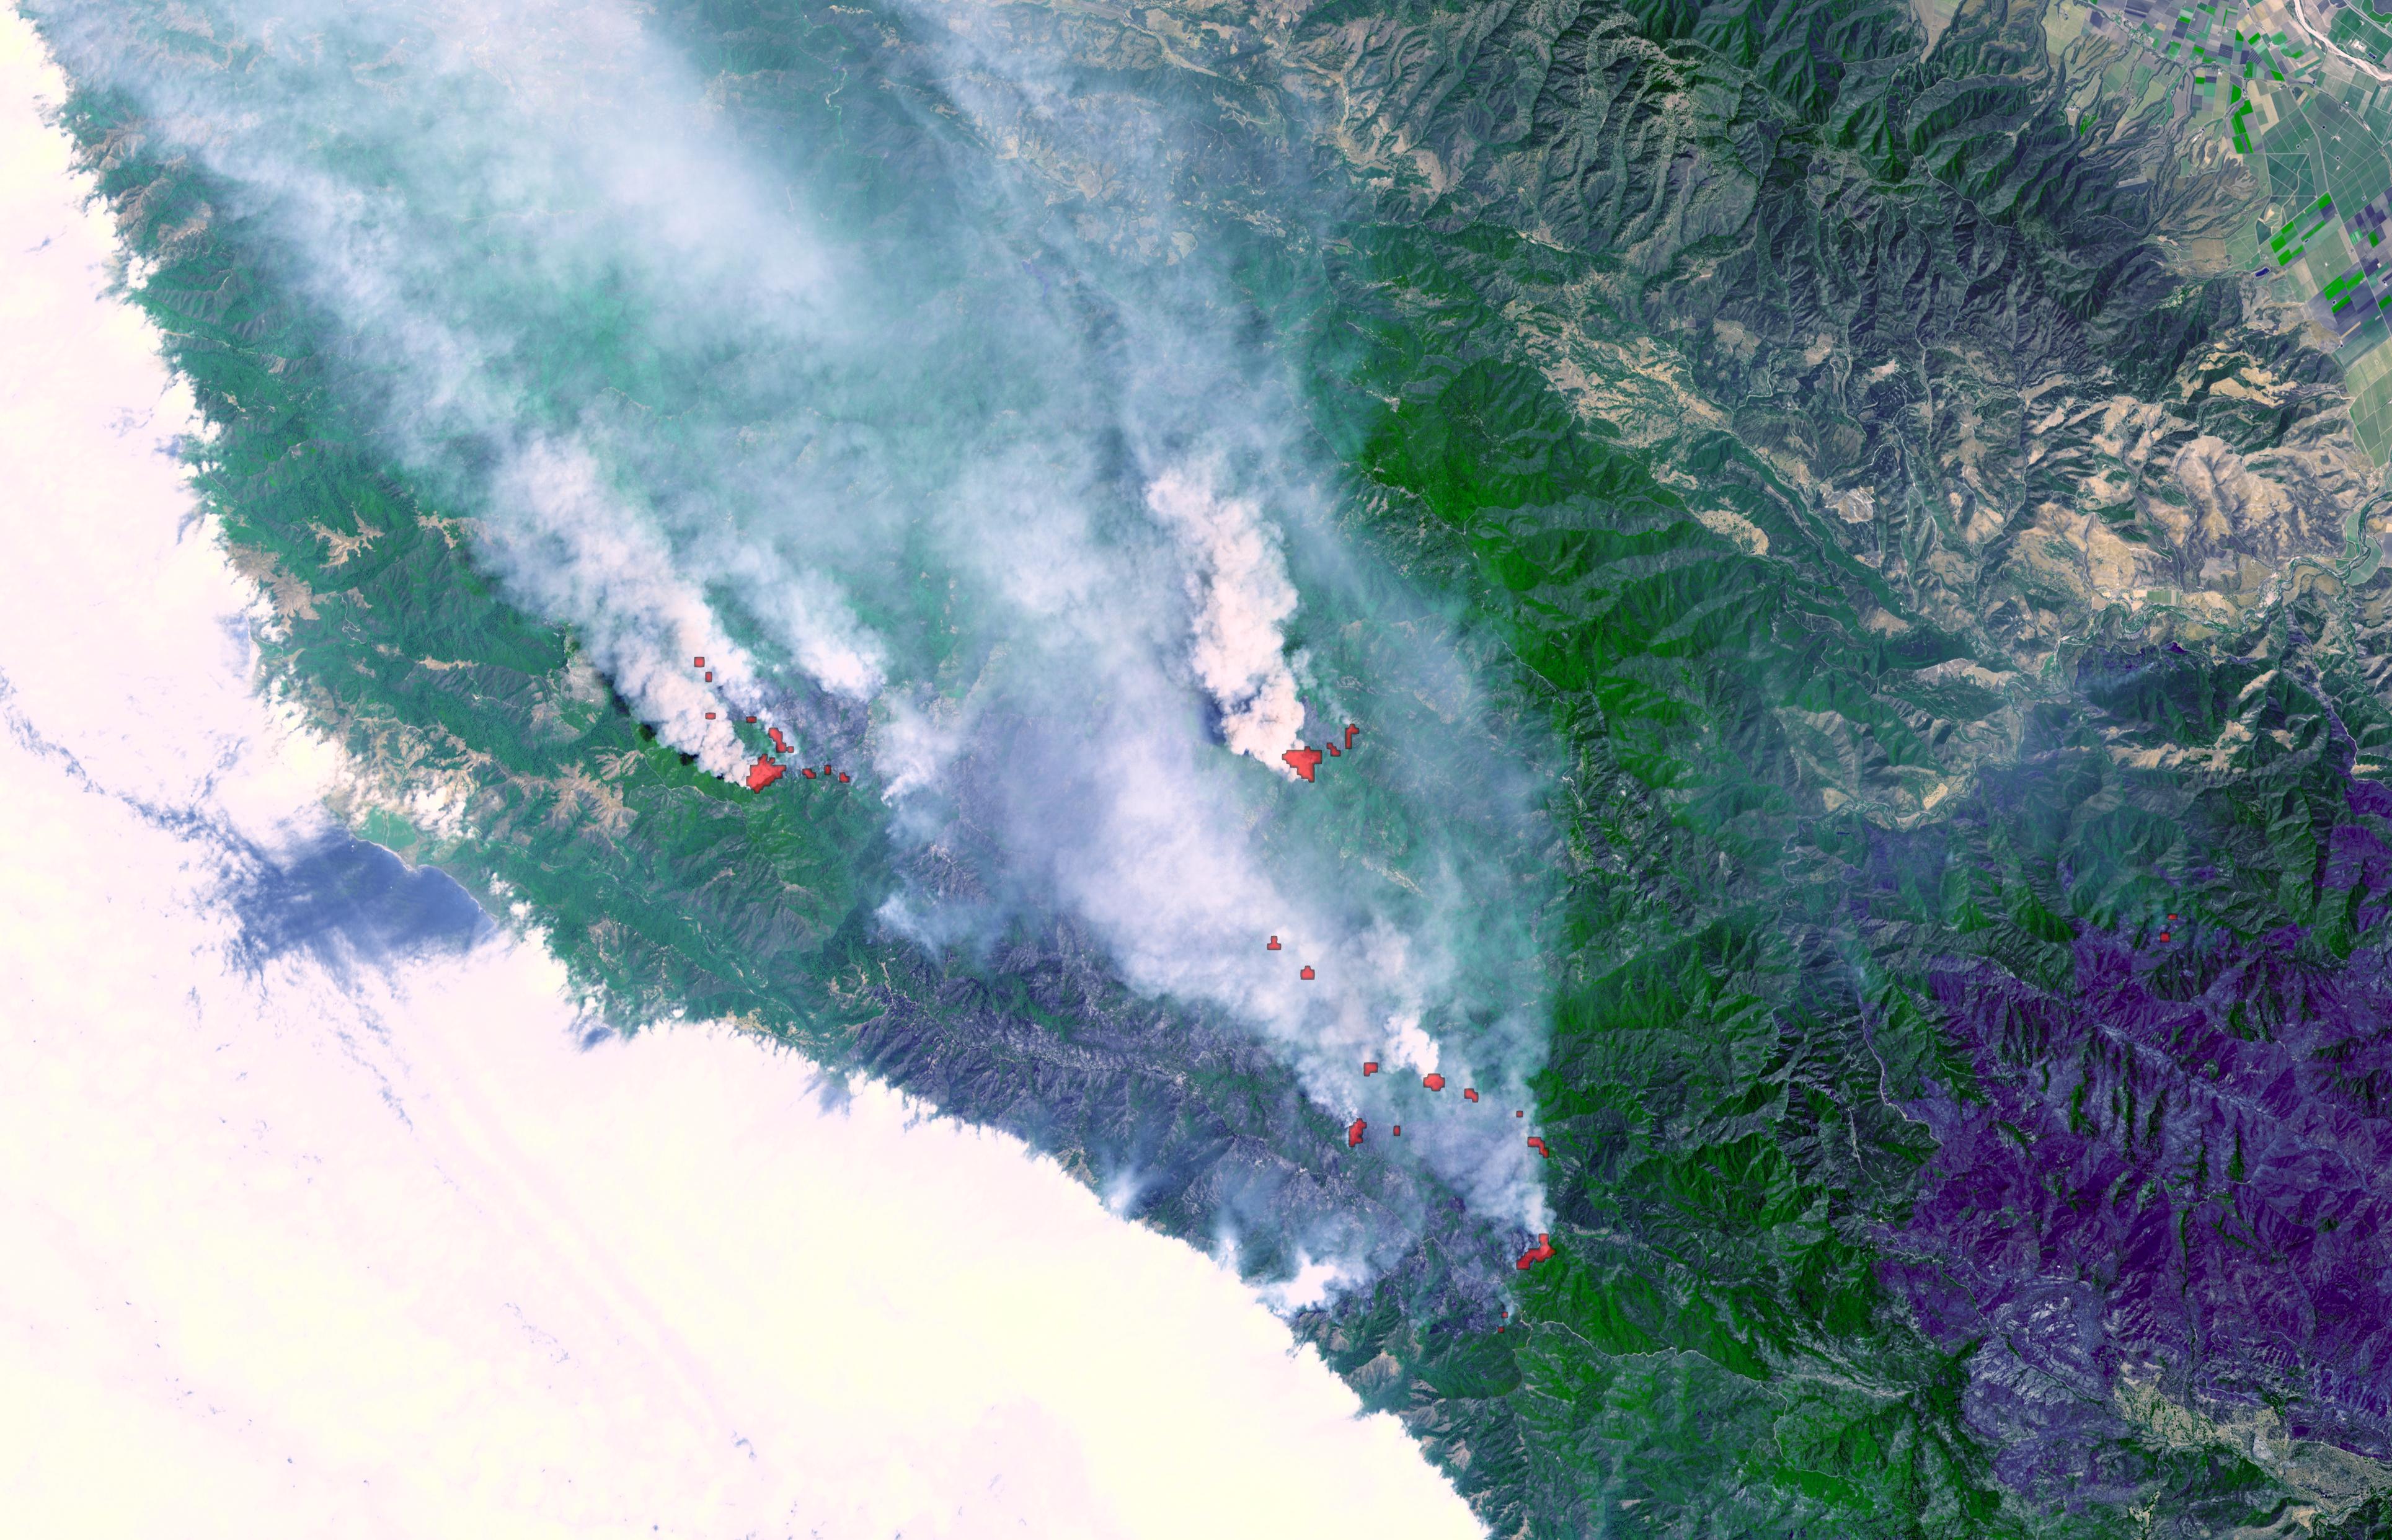 Big Sur fire, June 29, 2008. The satellite image combines a natural color portrayal of the landscape, with thermal infrared data showing the active burning areas in red. The dark area in the lower right is a previous forest fire.